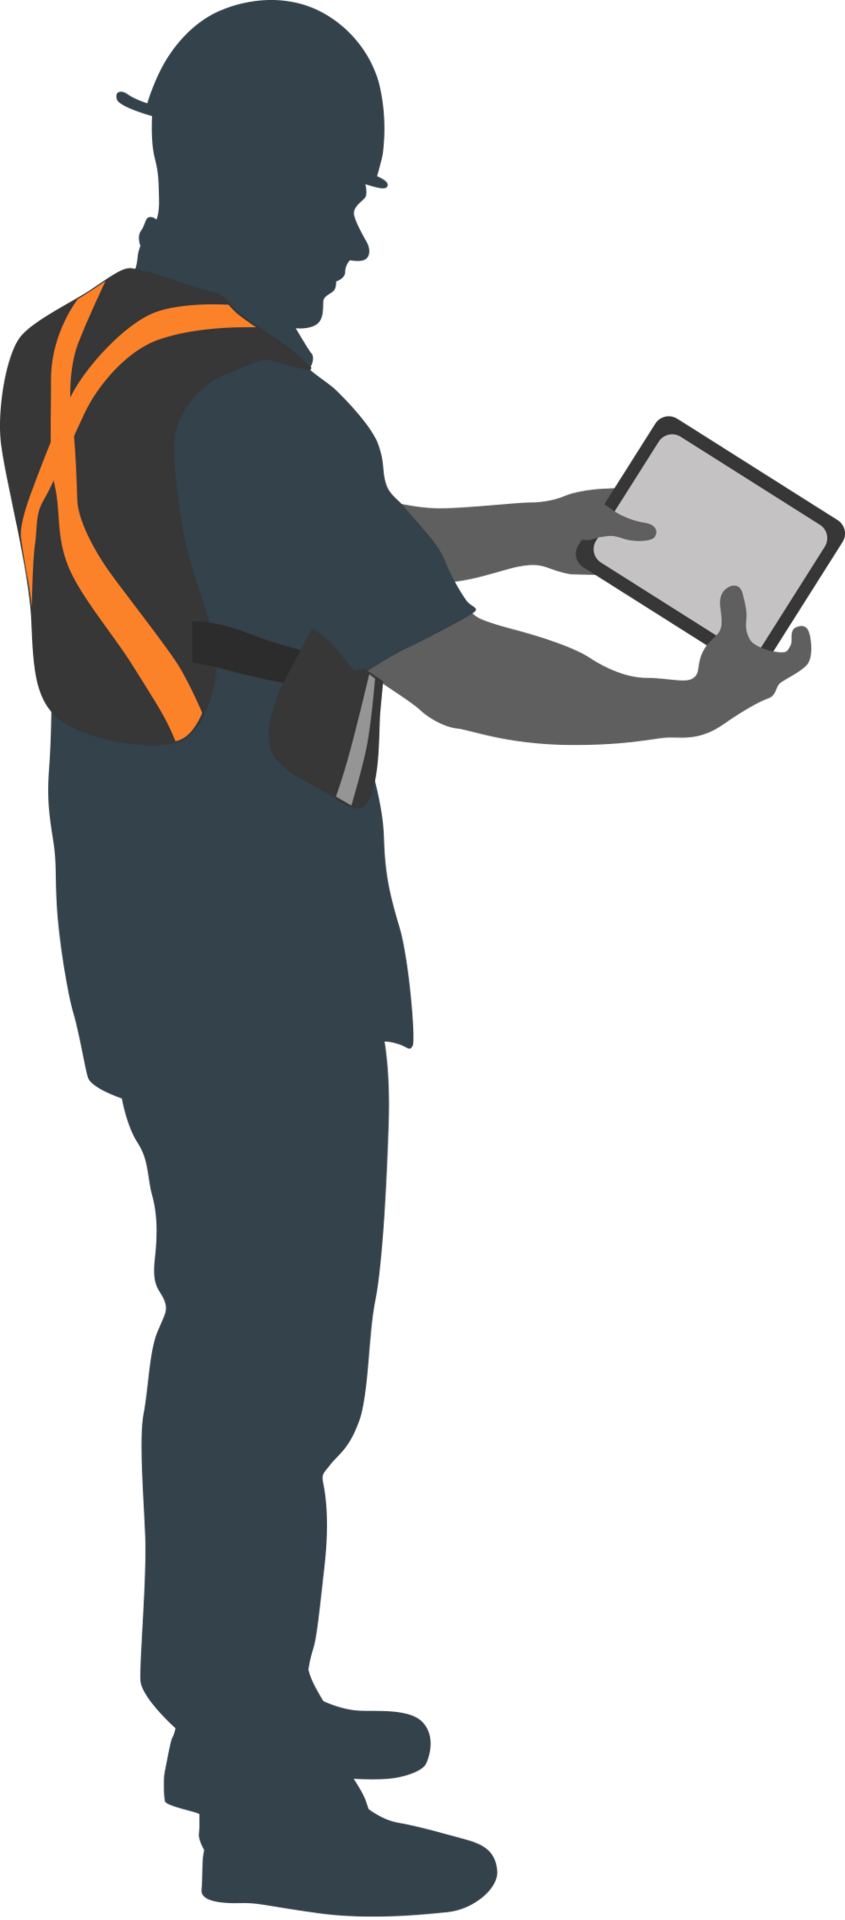 Construction worker holding tablet